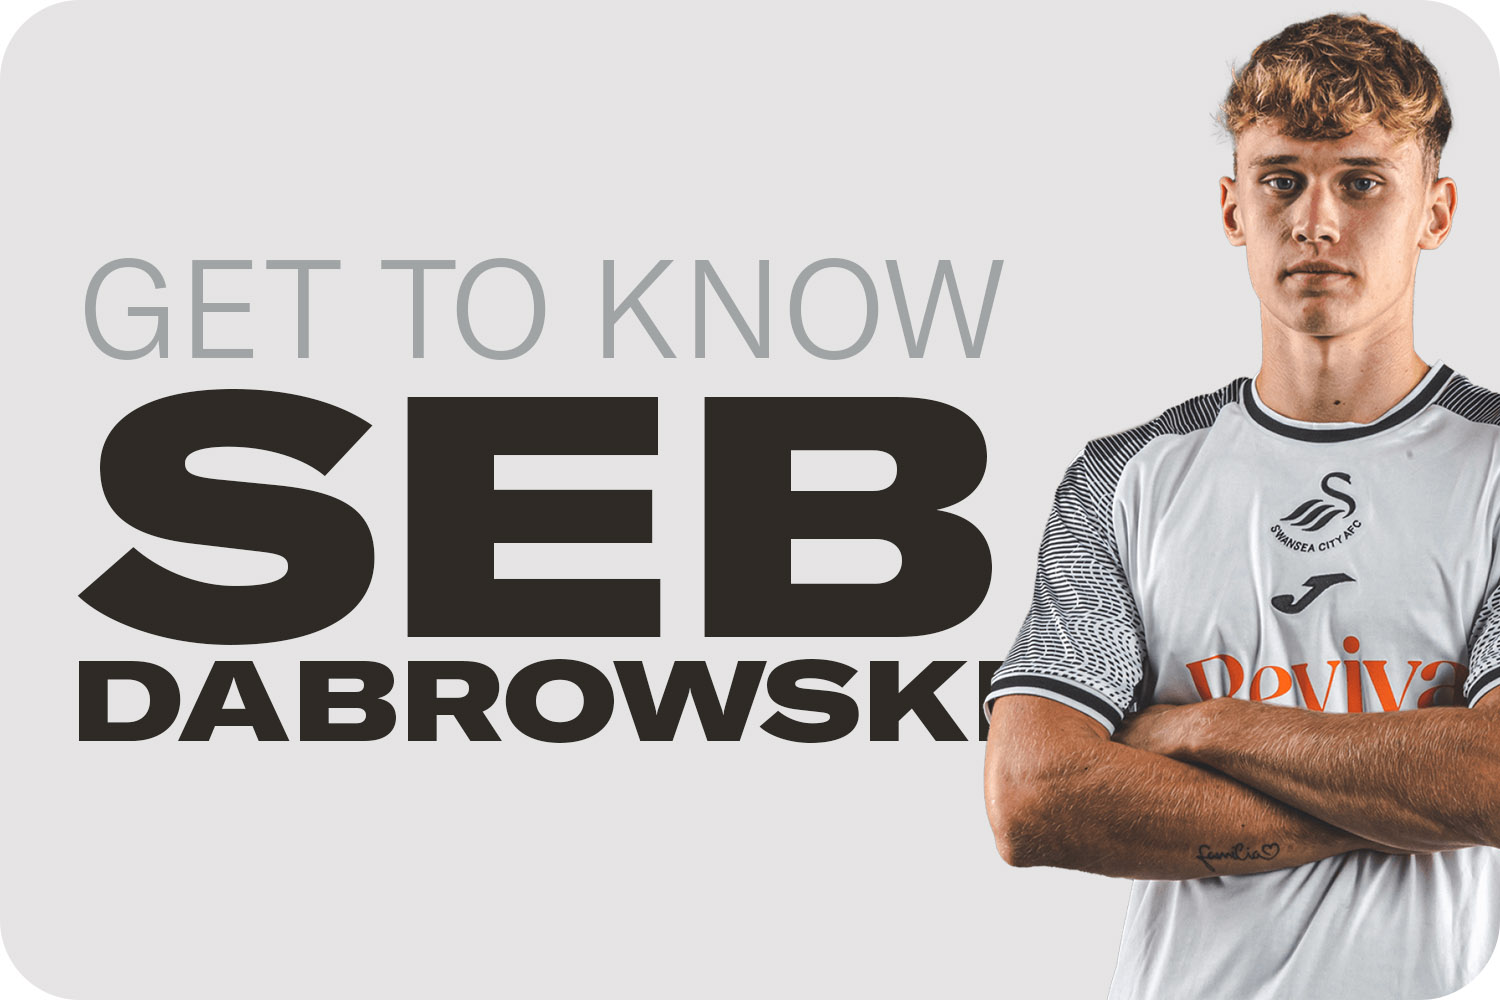 Get to Know Seb